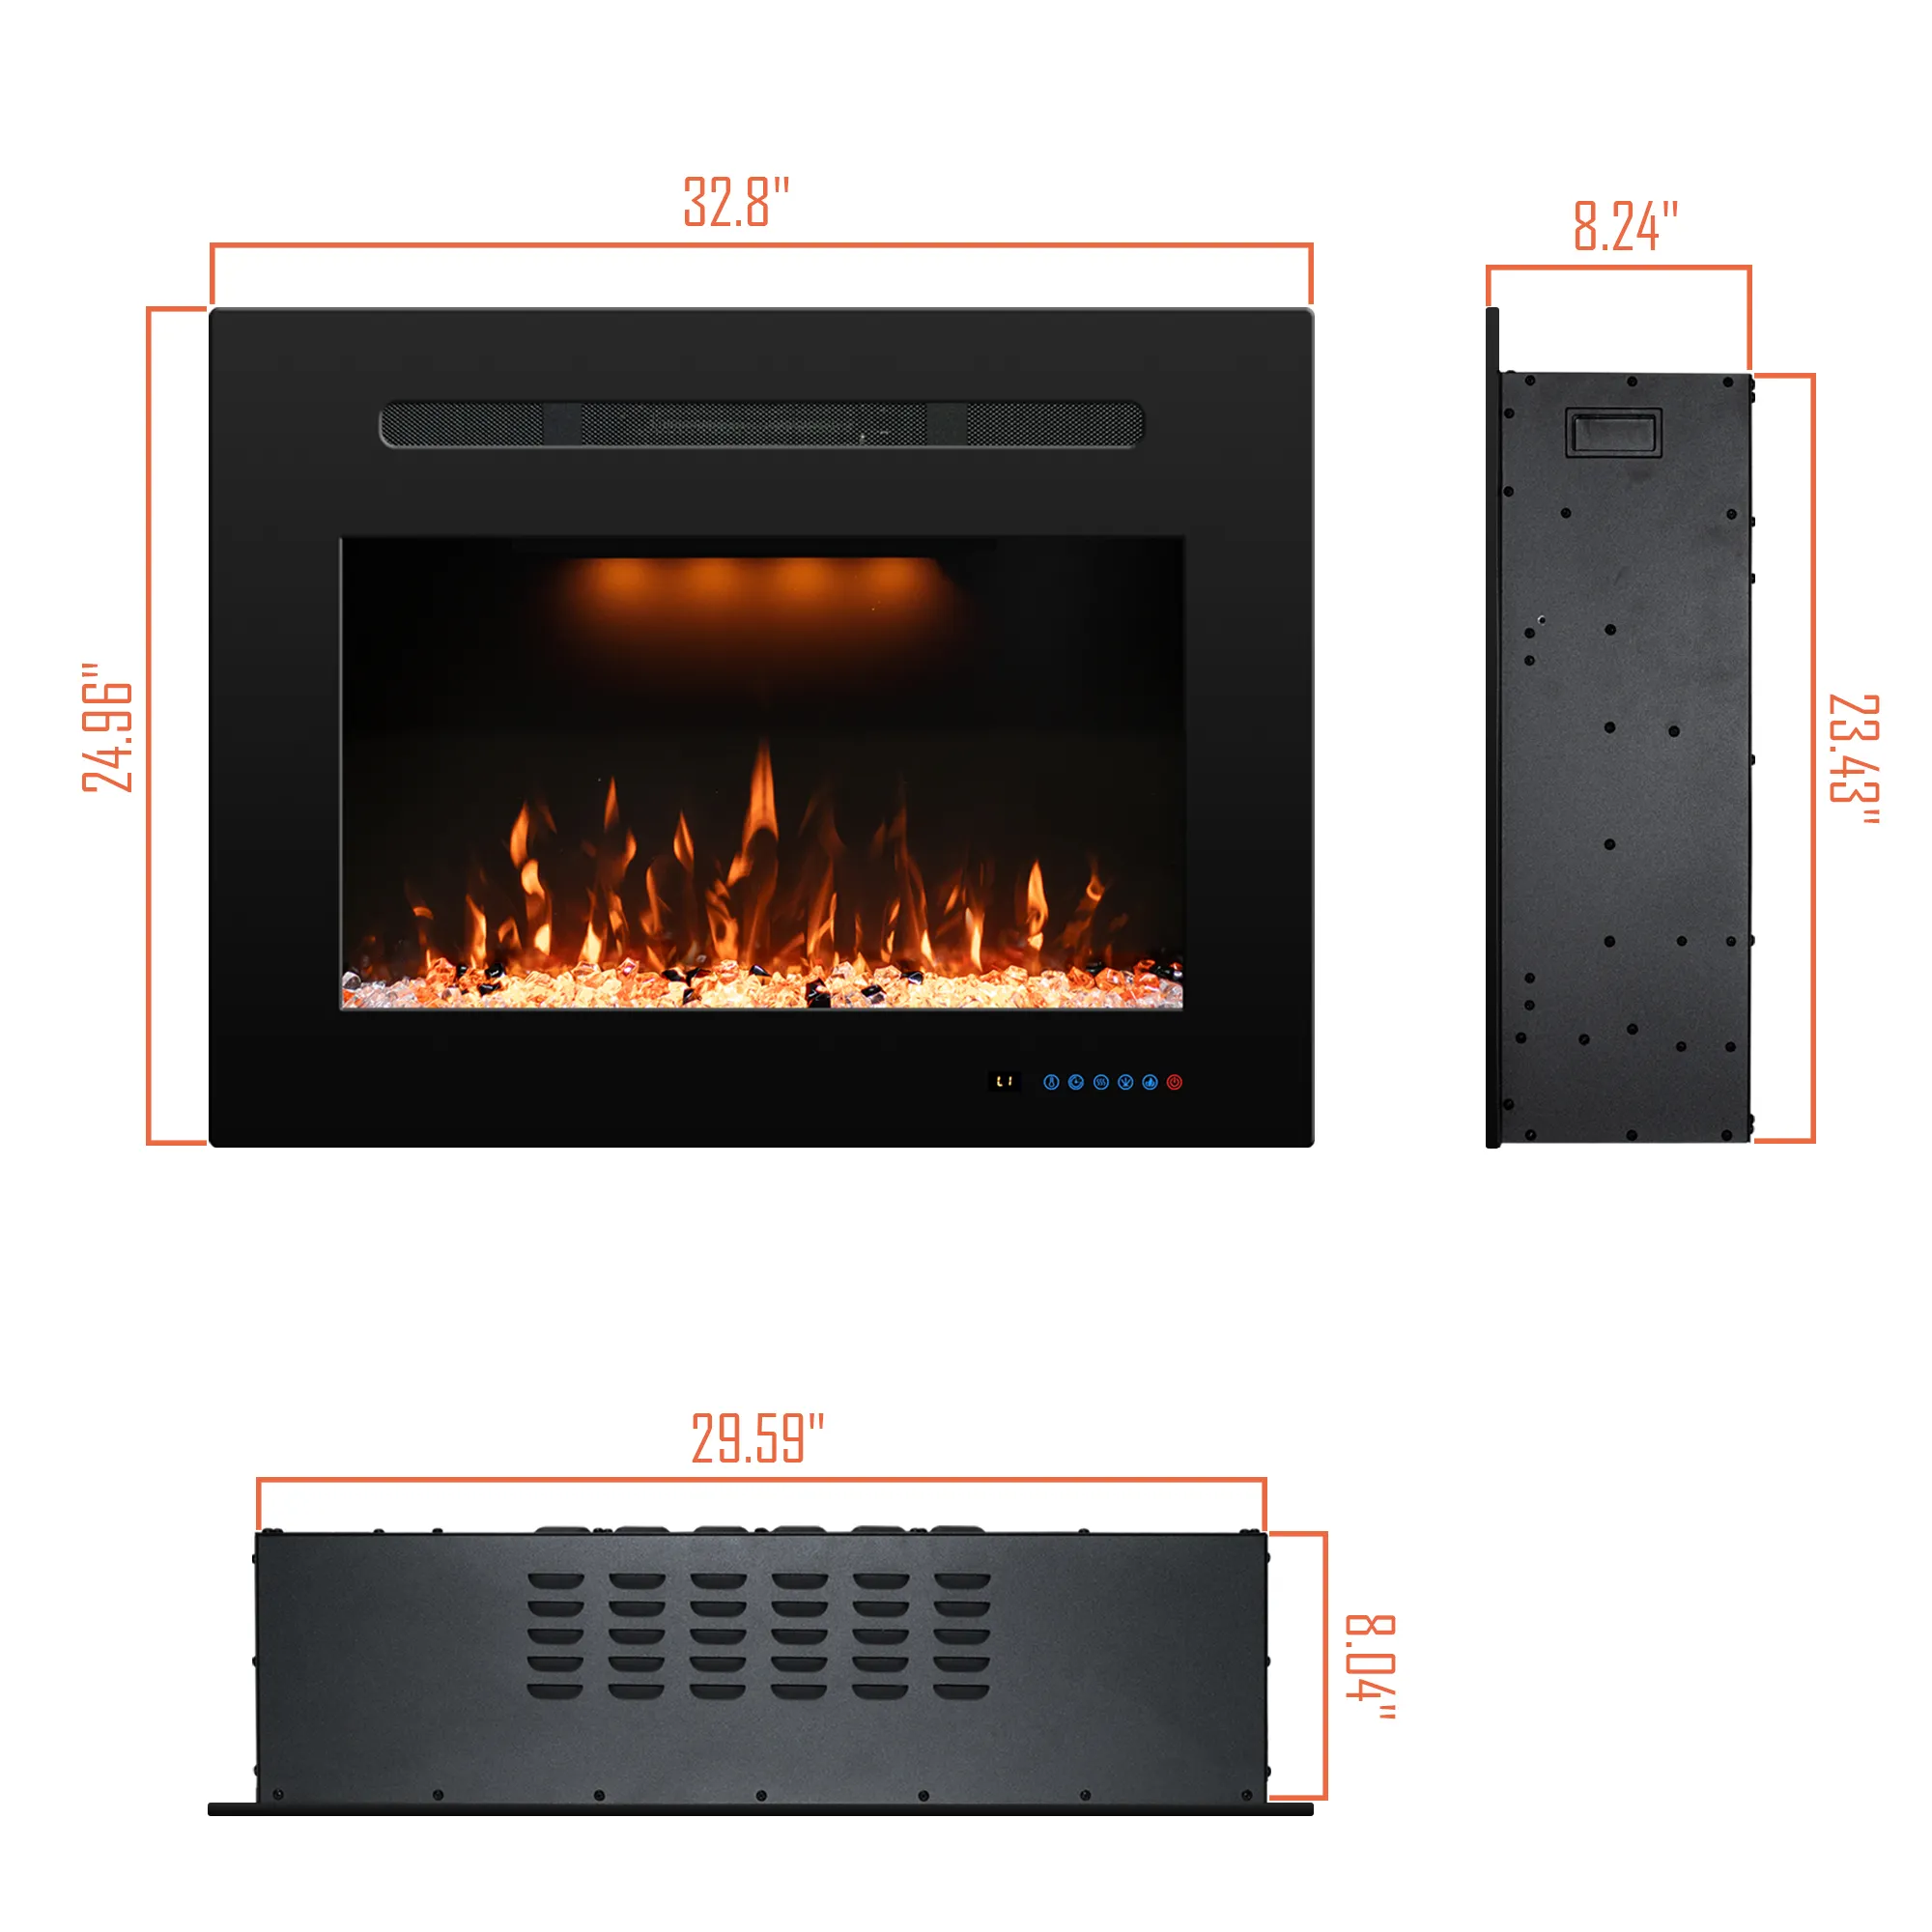 Dreamflame 30" Home Electric Fire Place Heater Insert With Led Artificial Flames Real Log Burning Crackling Sound